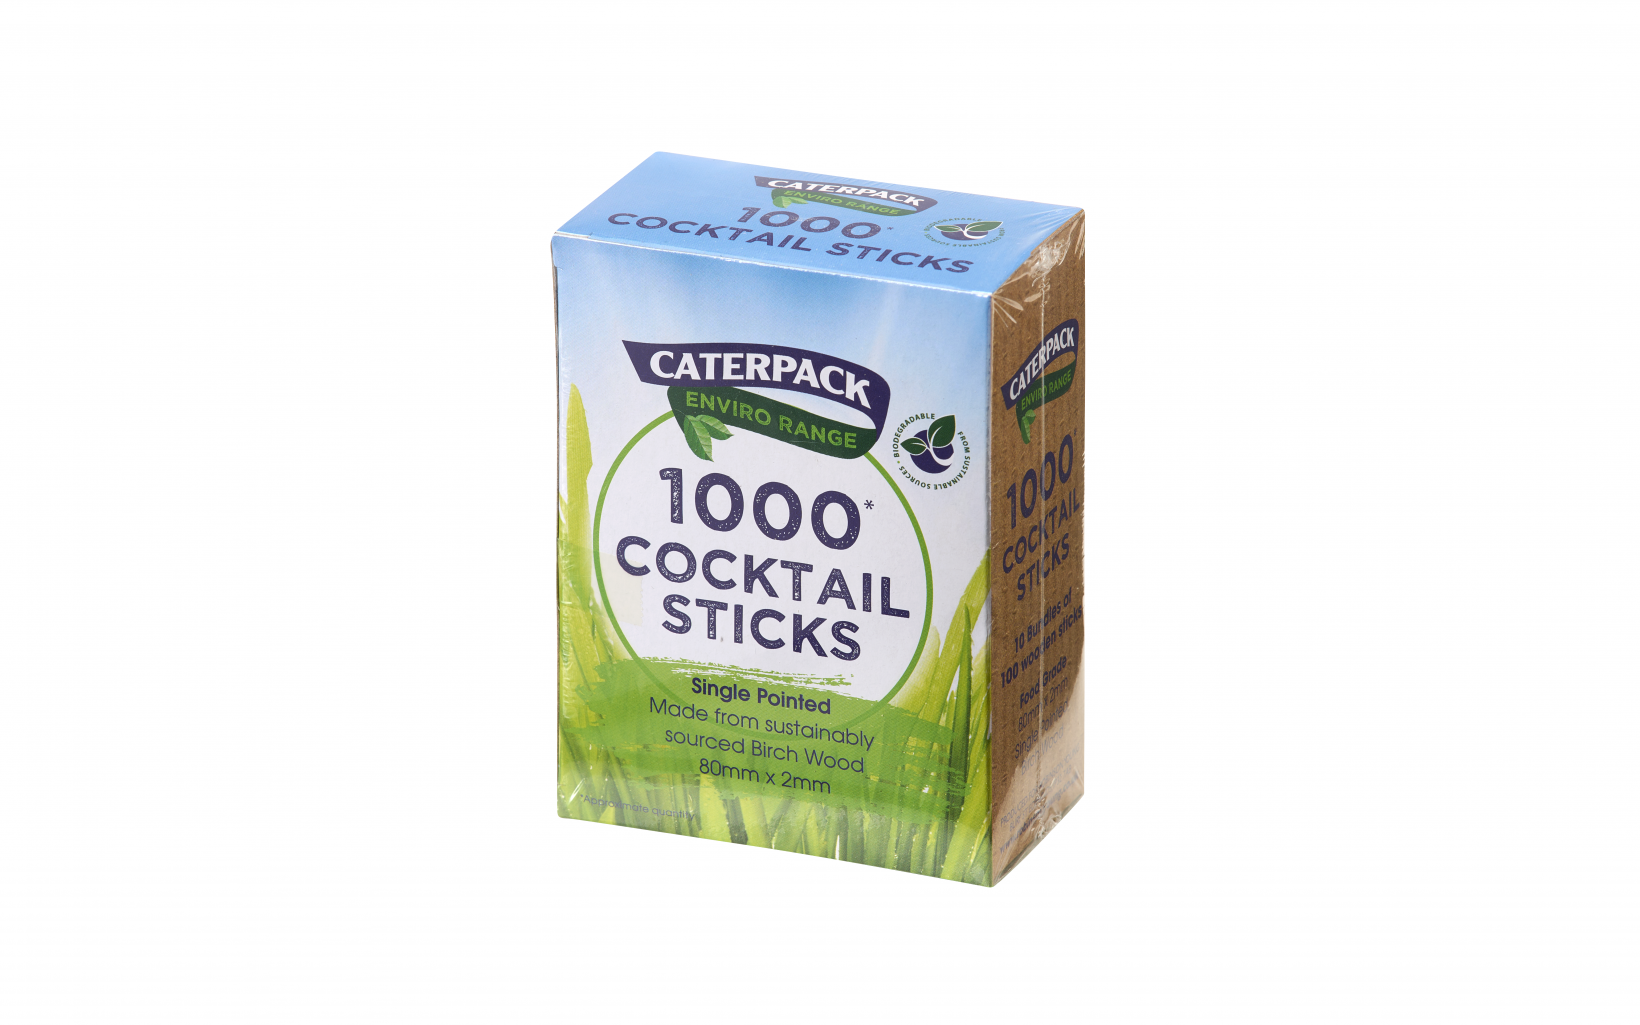 27229 Ry0263 Caterpack Cocktail Sticks 1000 Pack